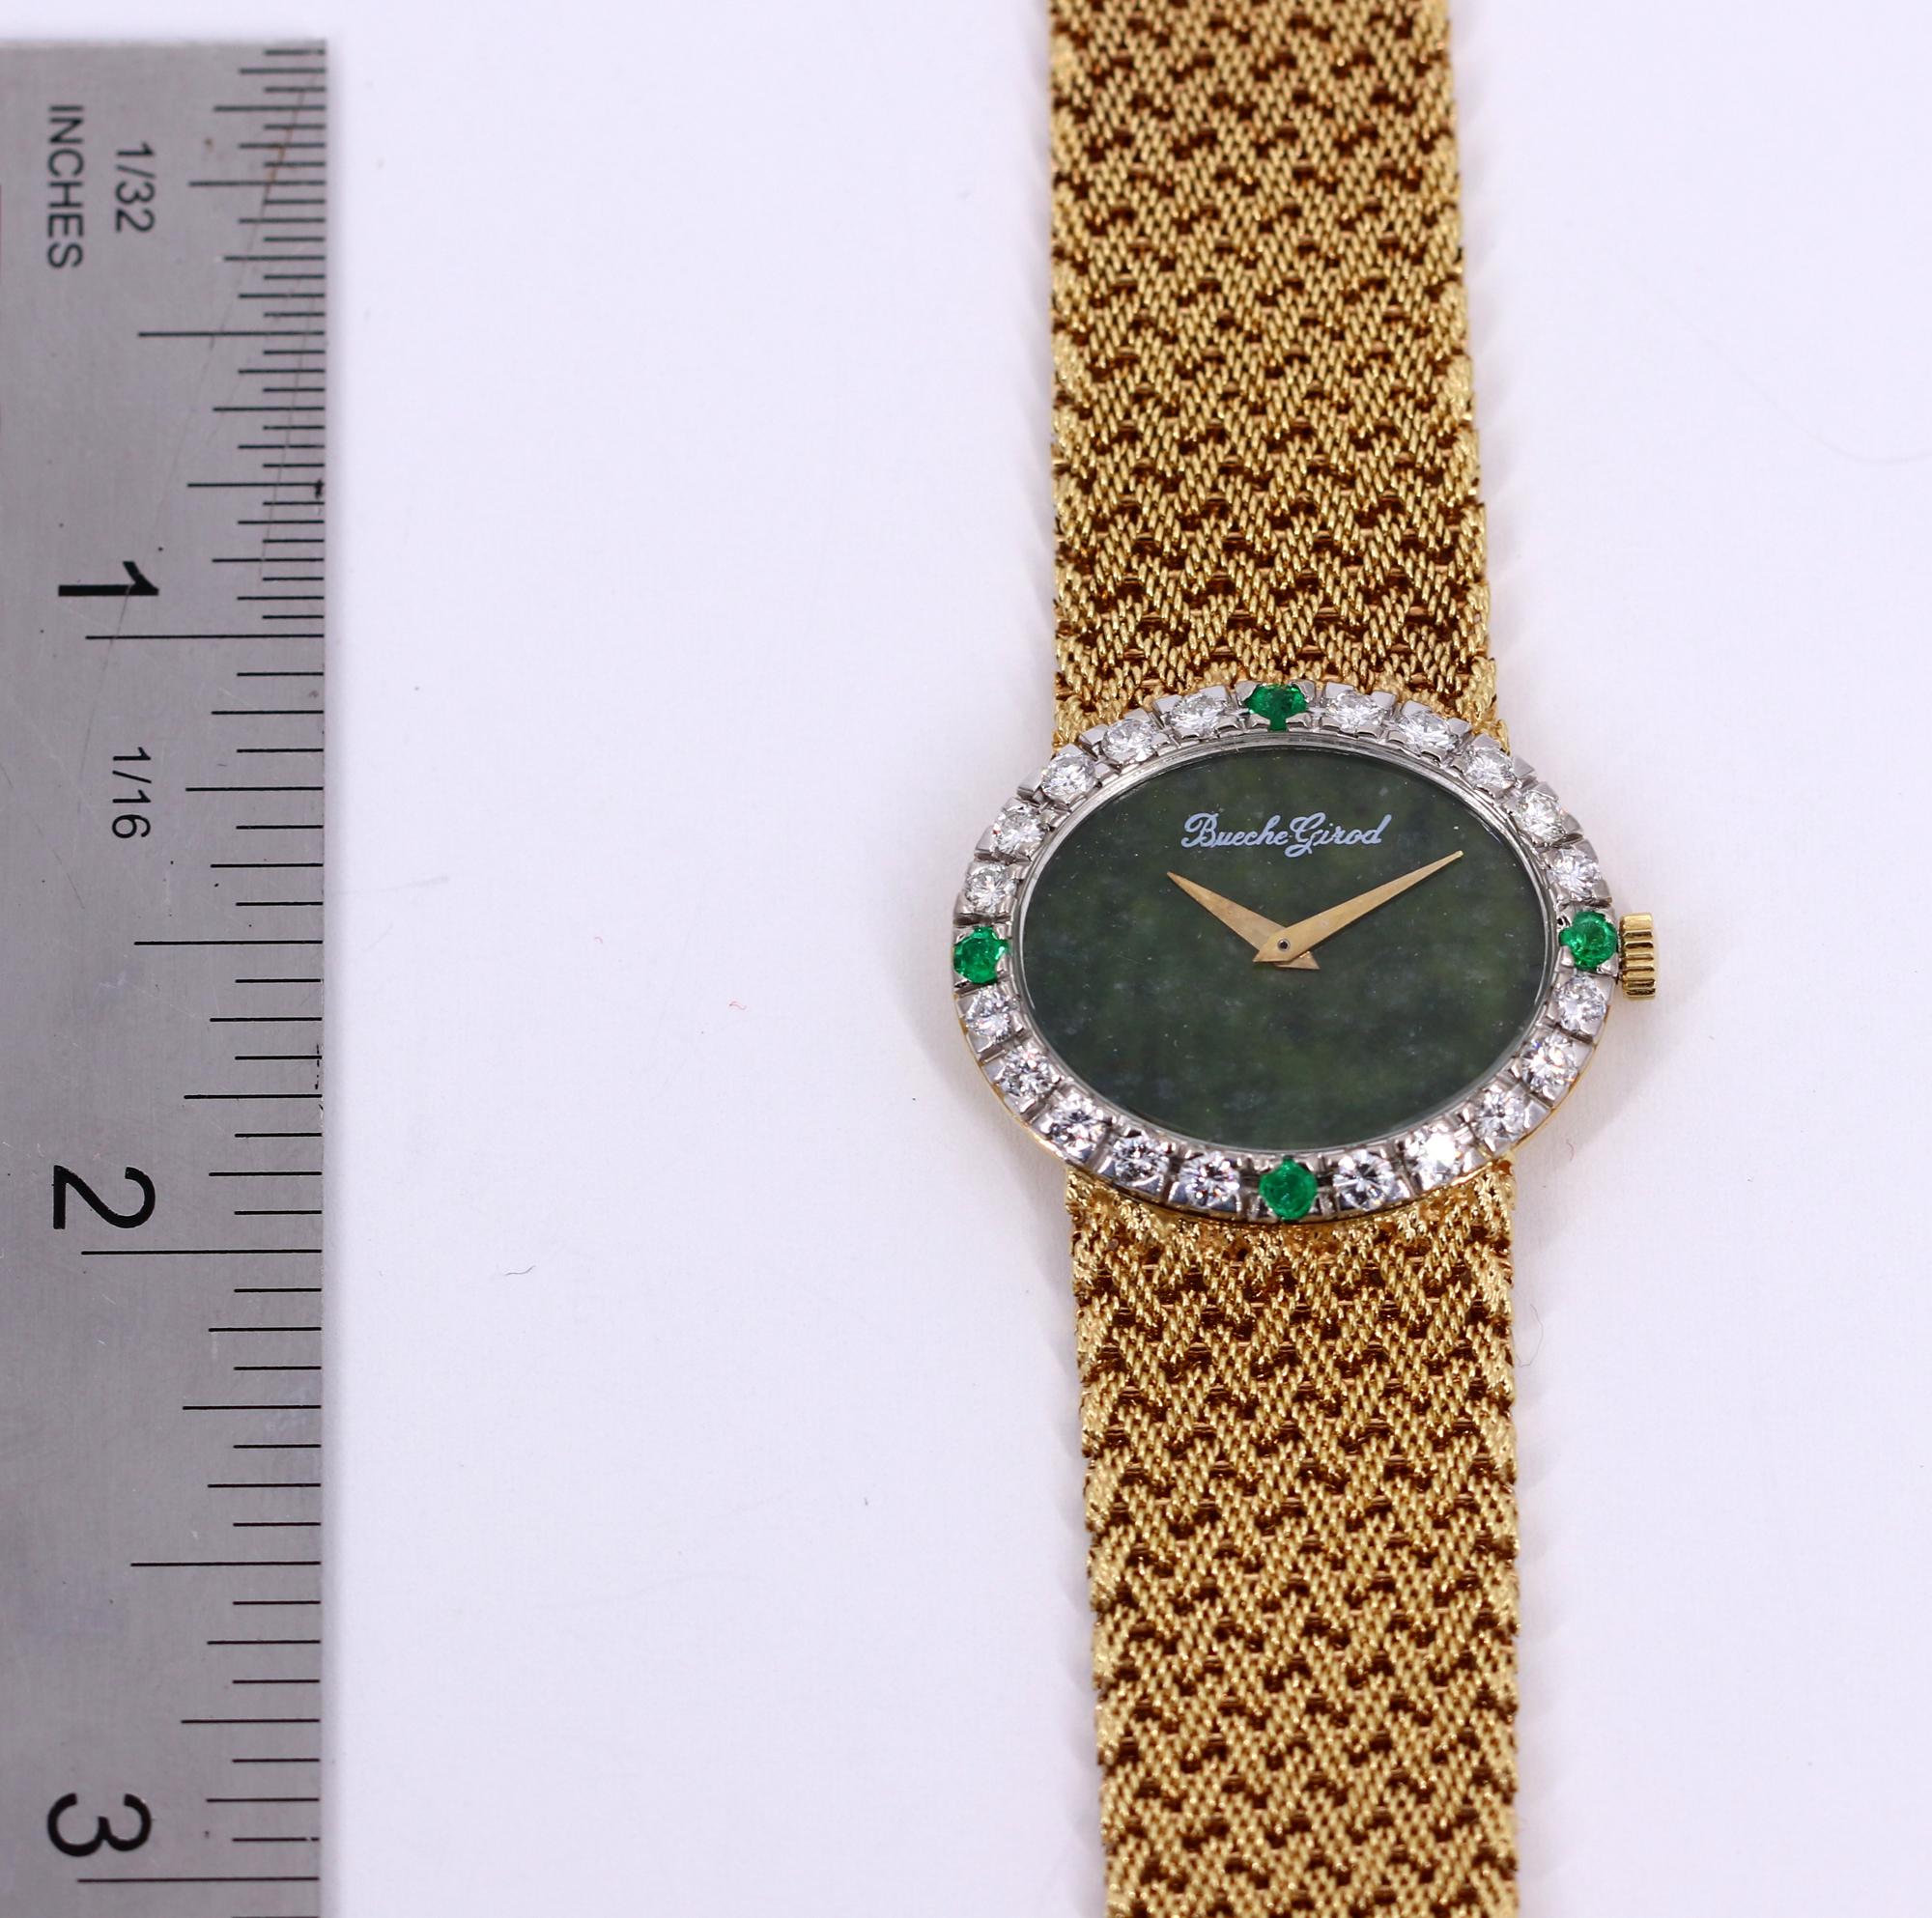 Ladies Gold Beuche Girod Watch with Diamond and Emerald Bezel and Jade Dial 3